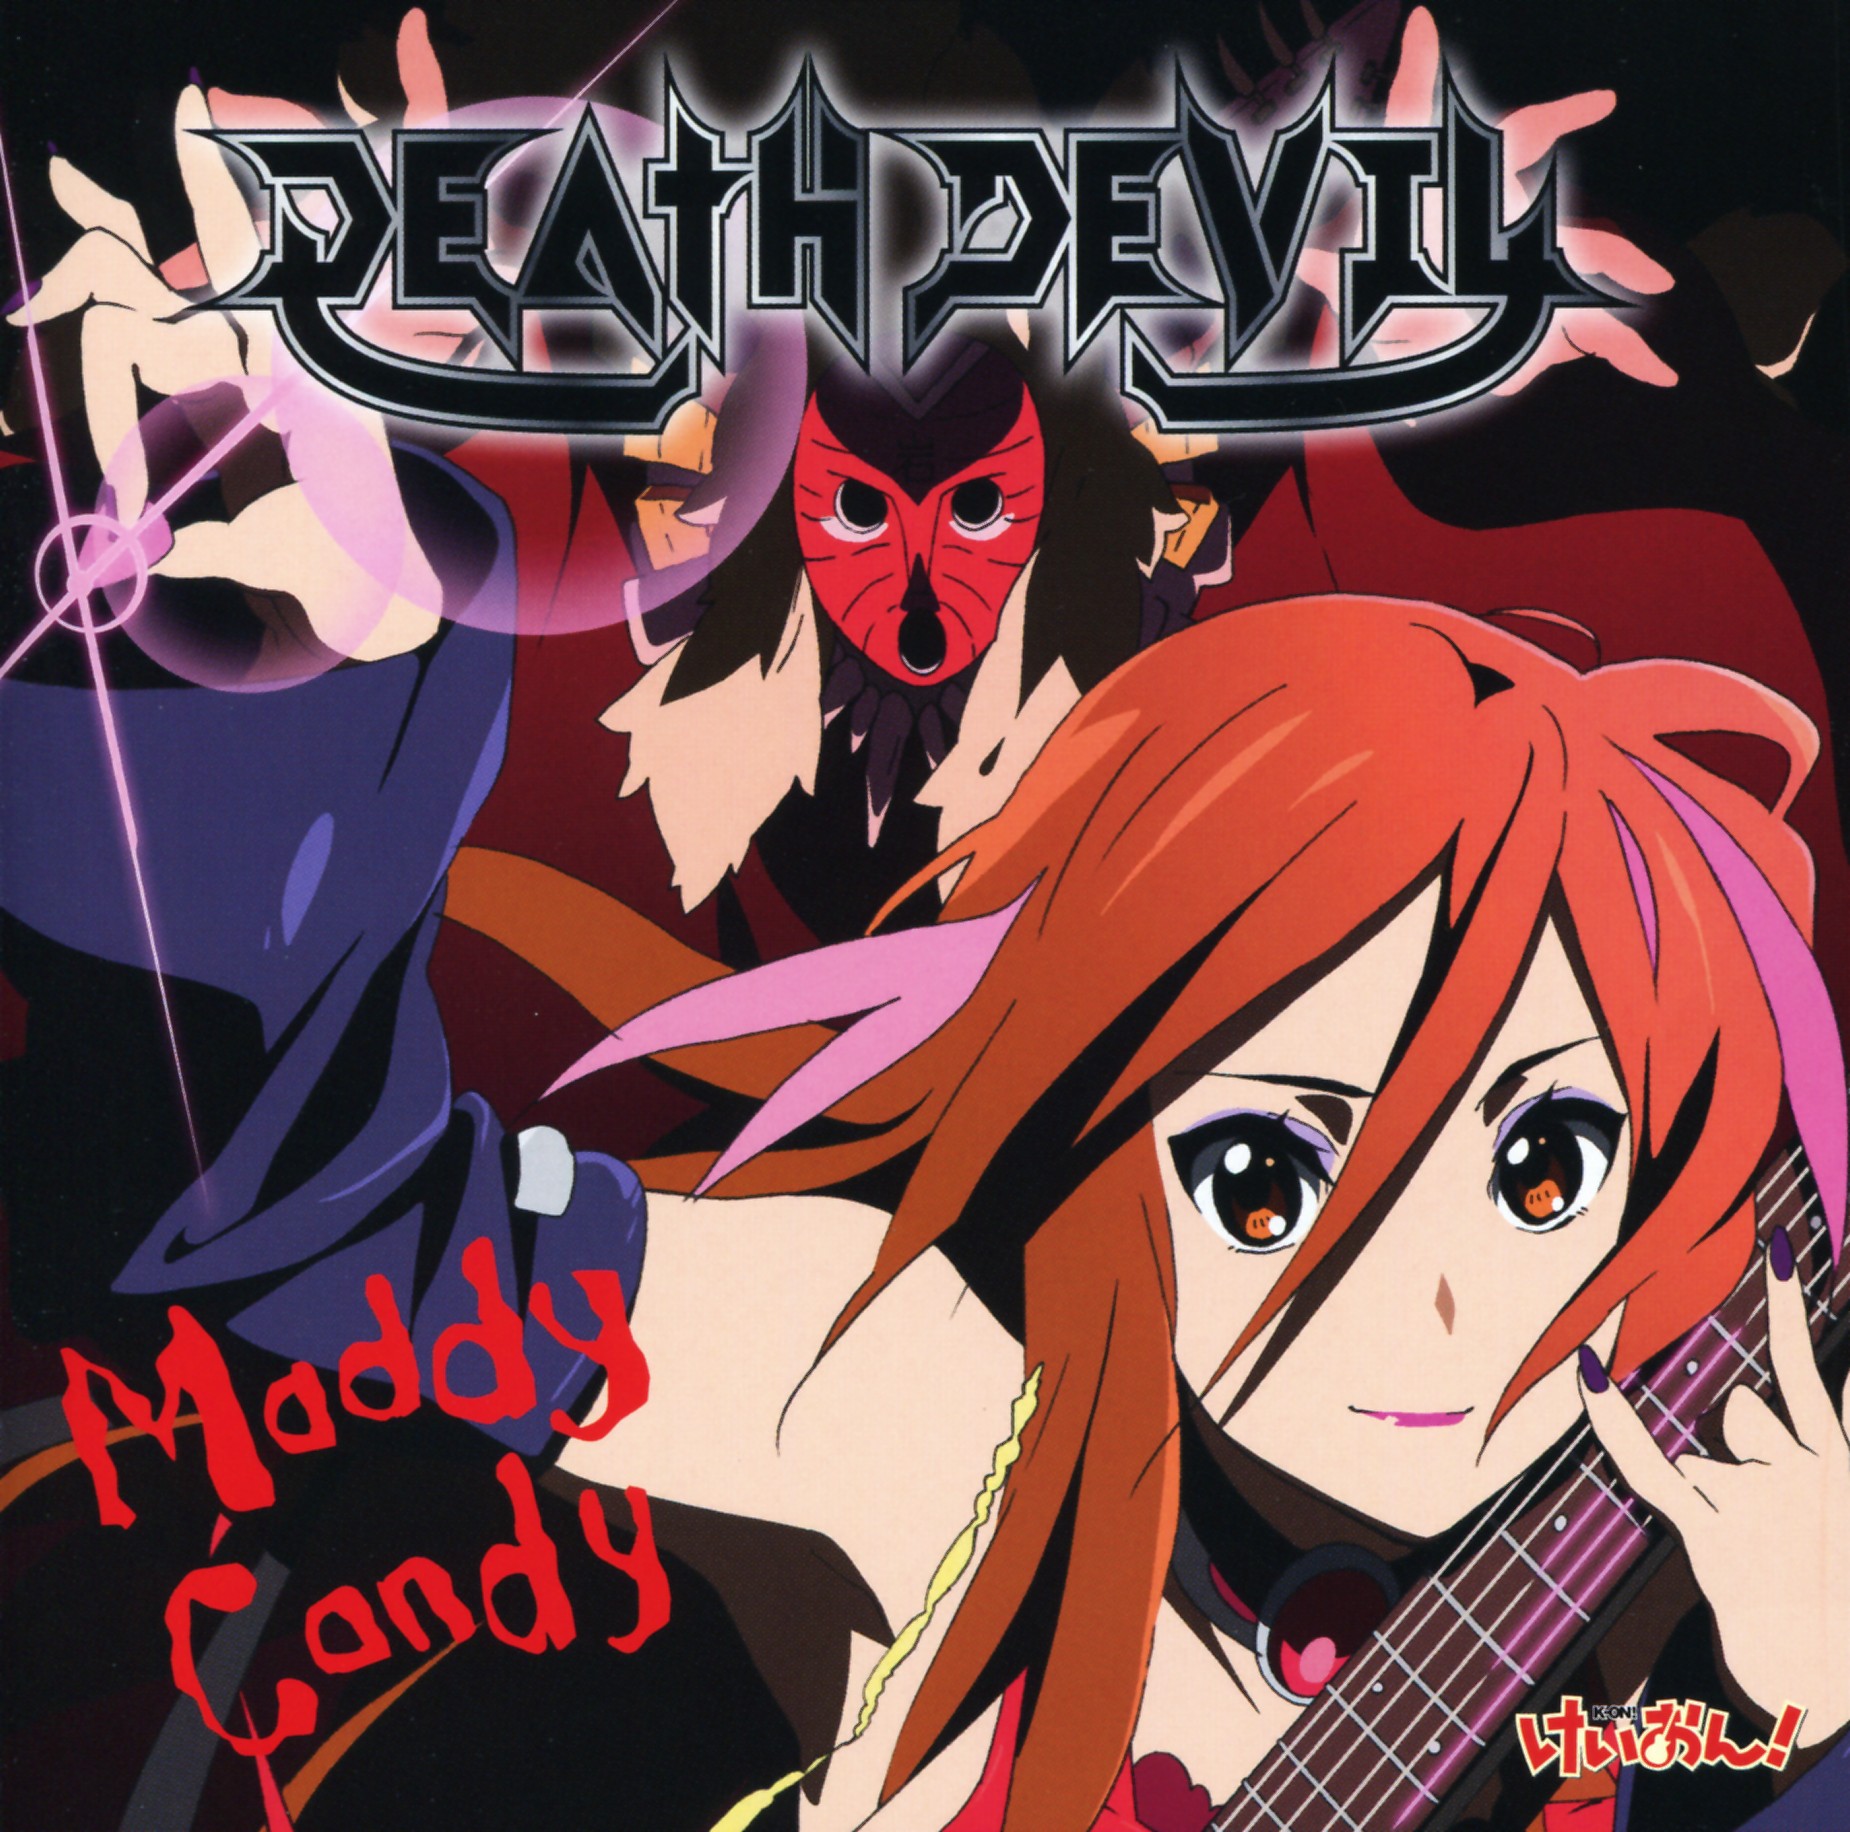 Cover Maddy Candy.jpg